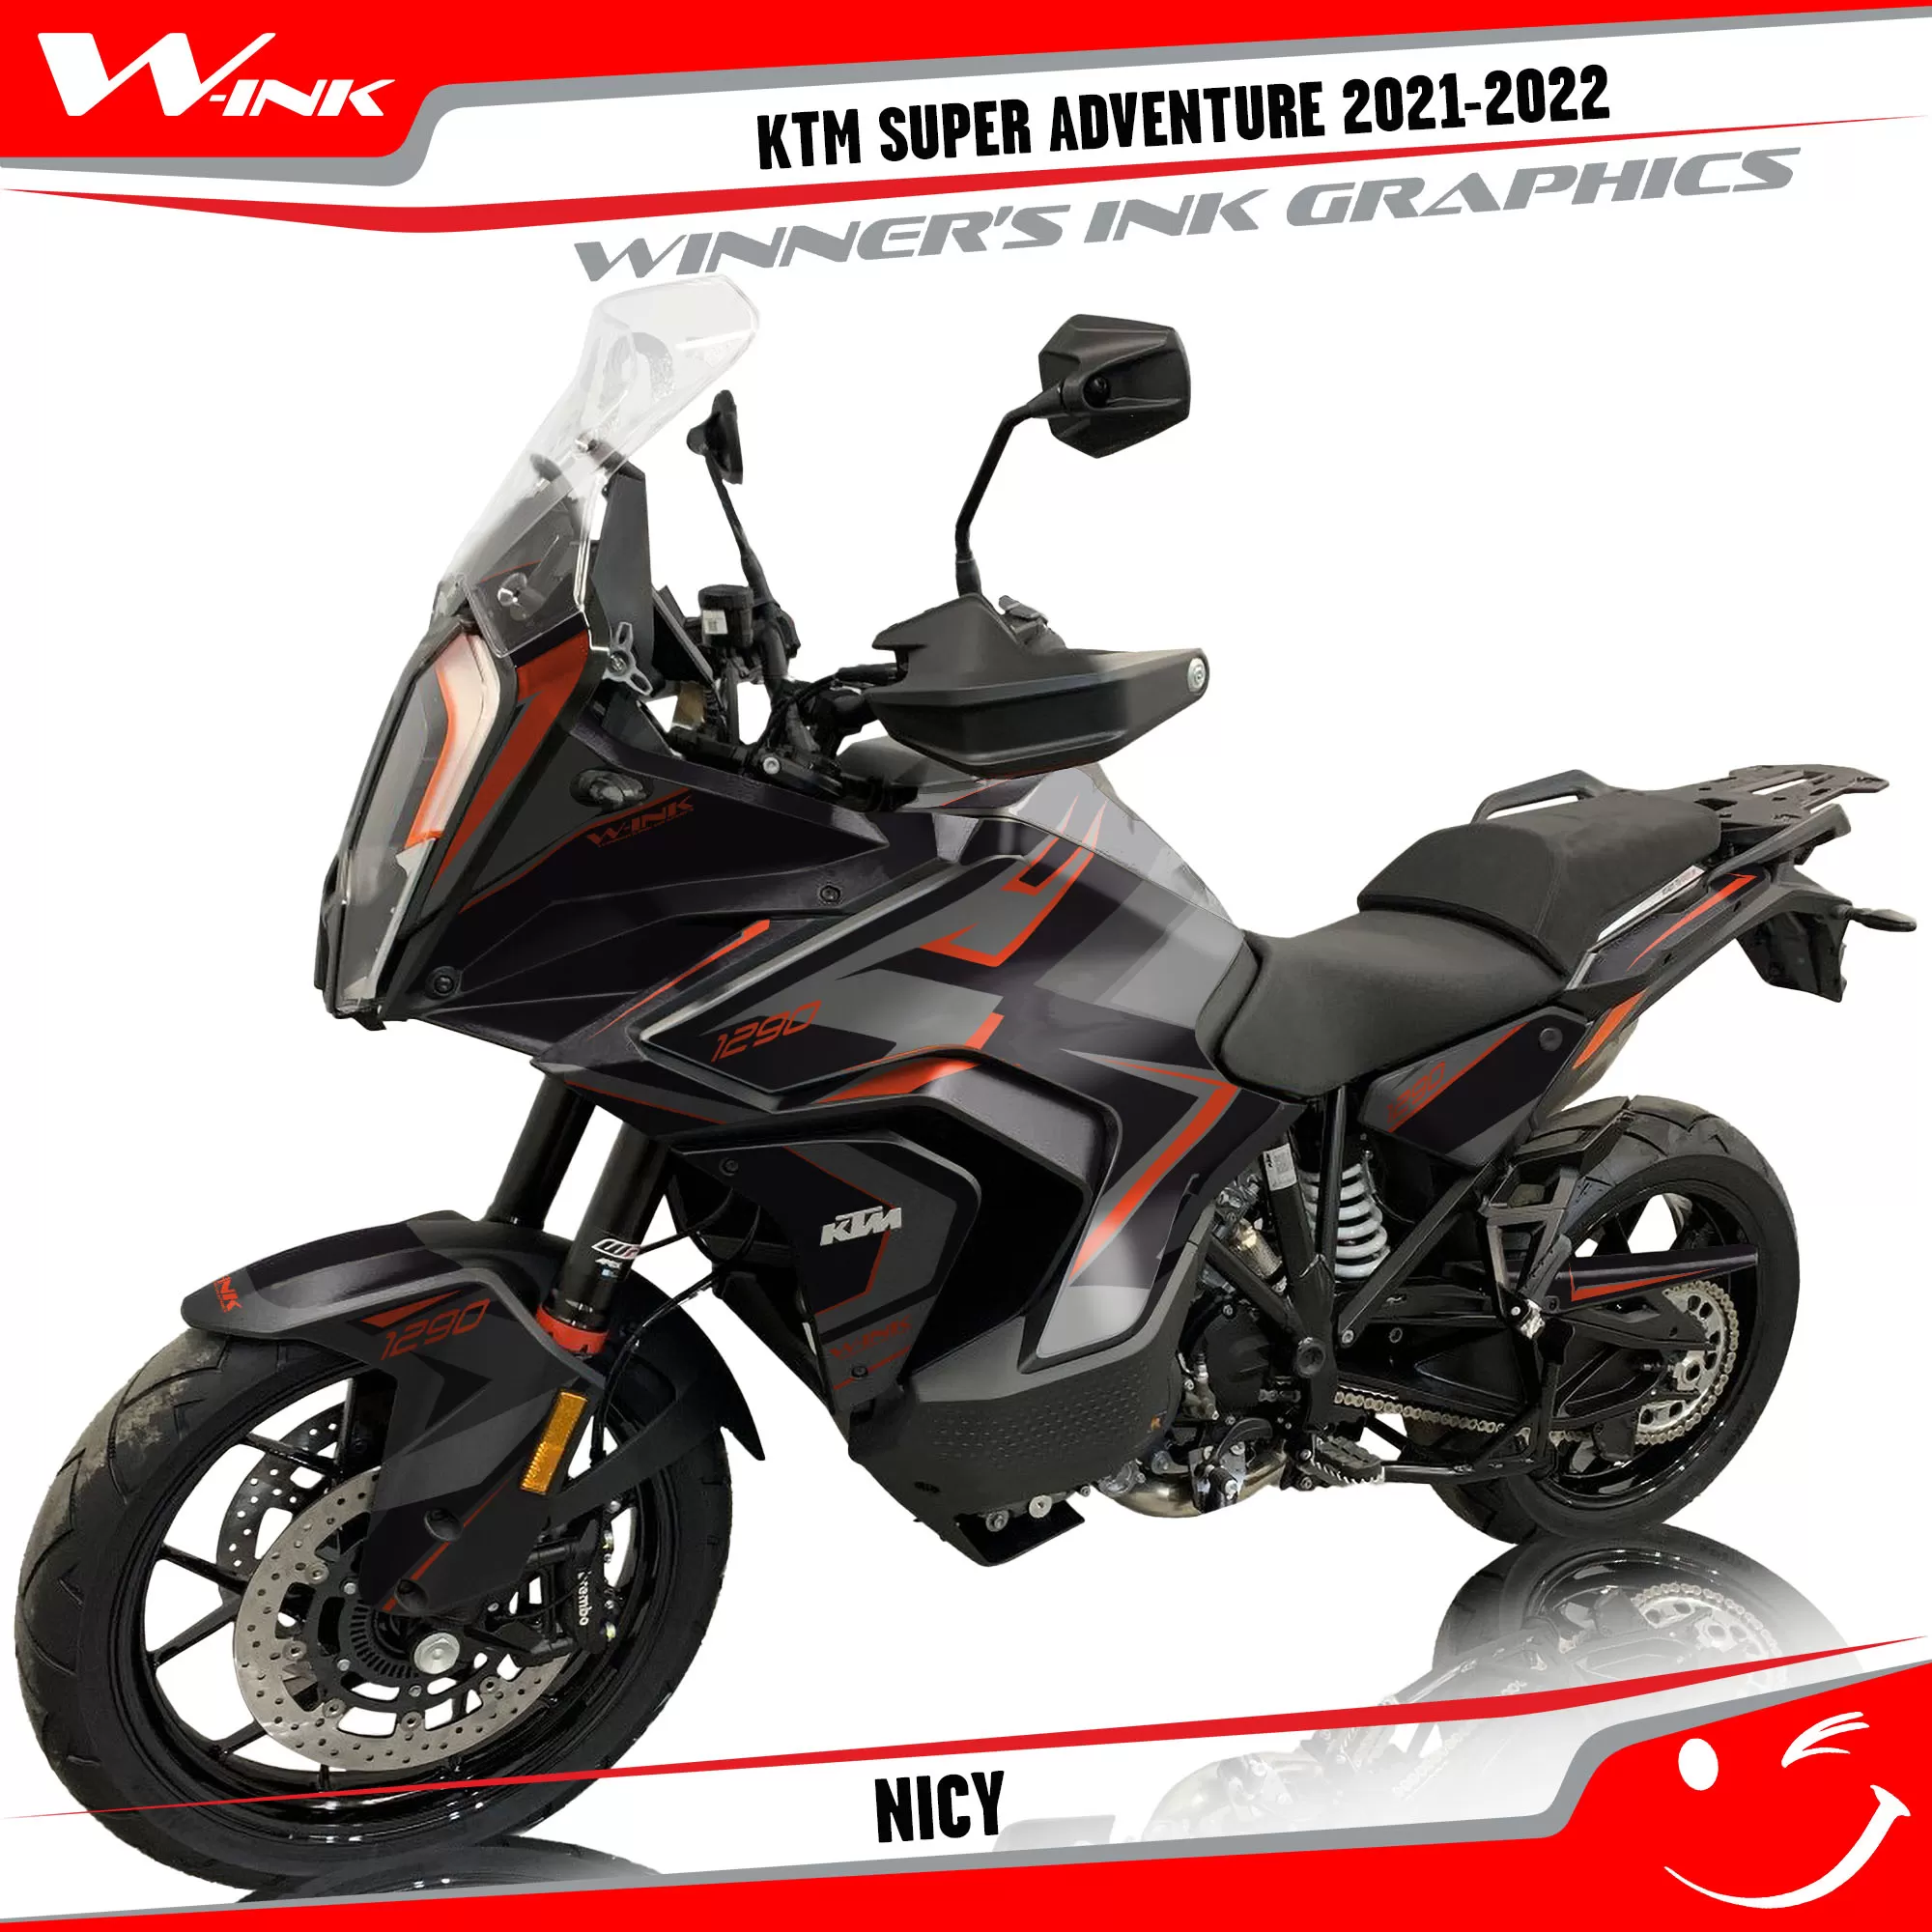 KTM-Super-Adventure-S-2021-2022-graphics-kit-and-decals-with-designs-Nicy